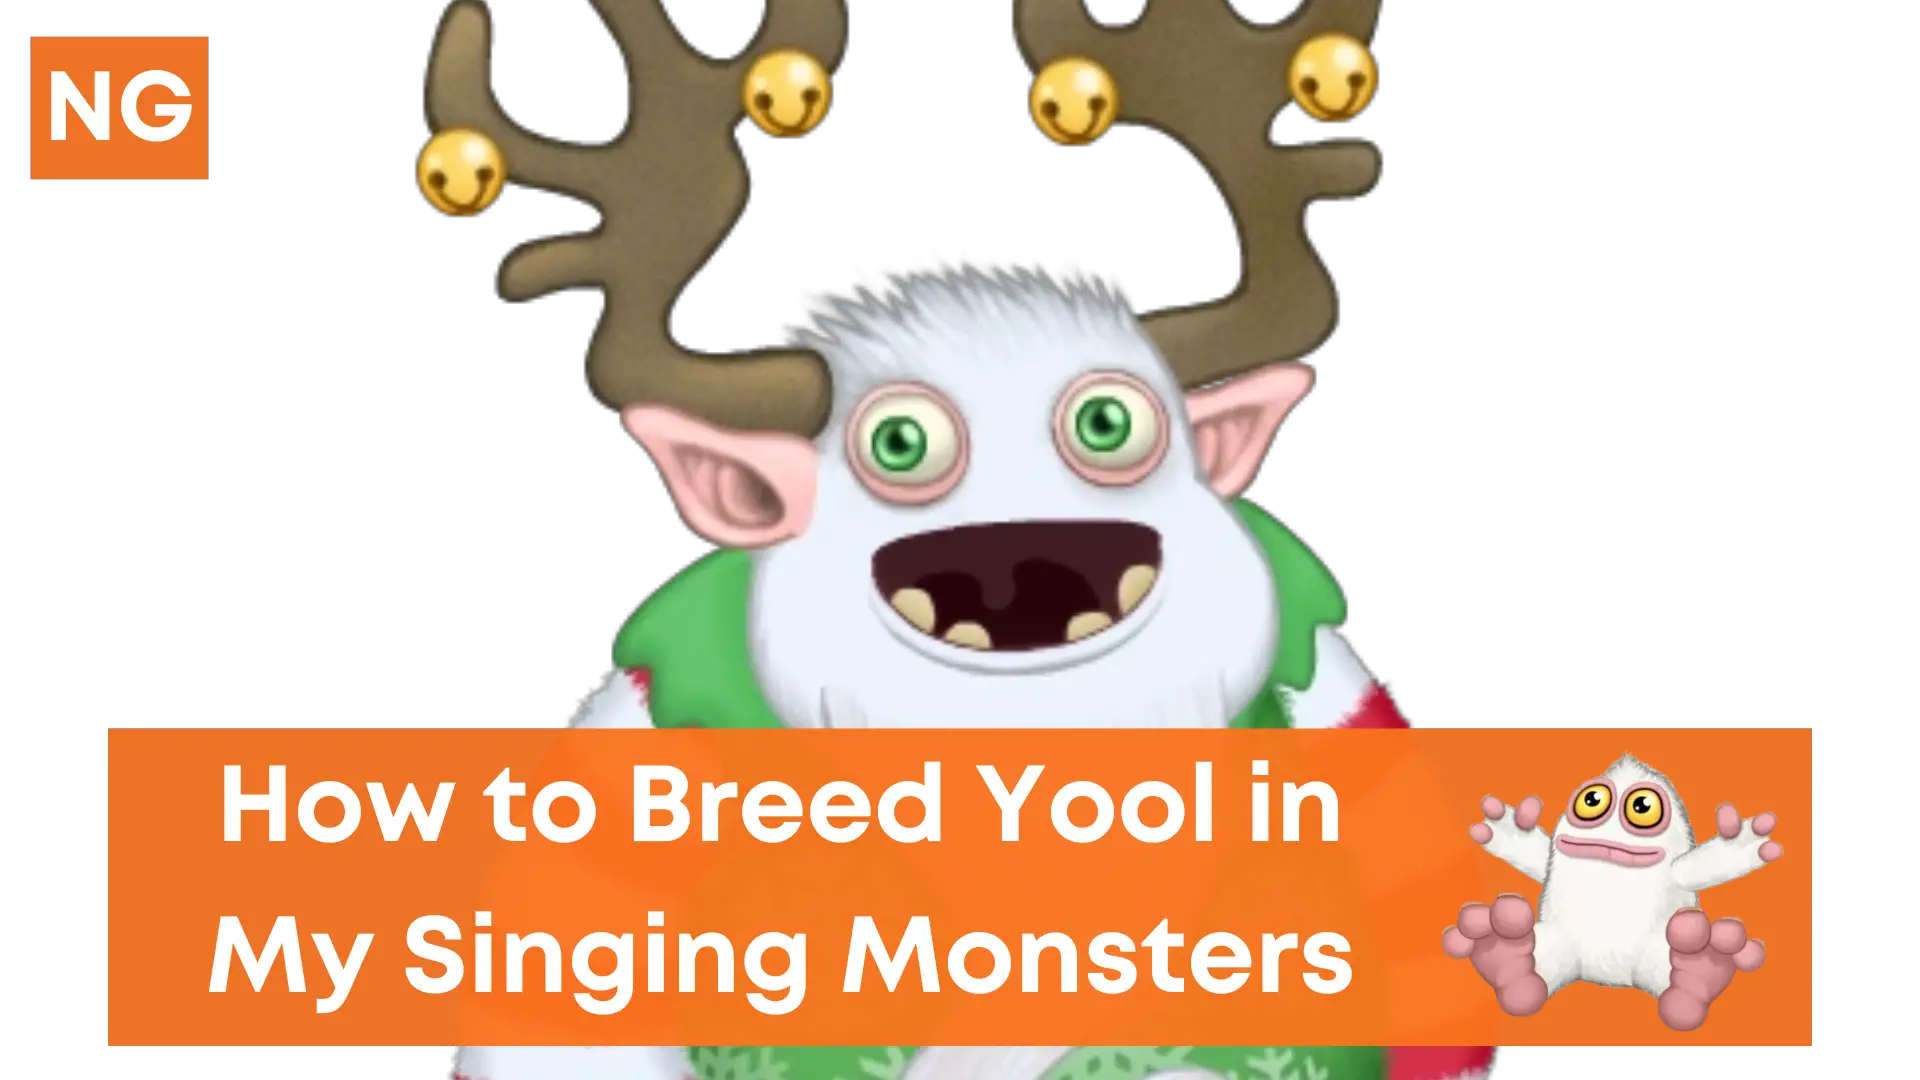 How to Breed Yool in My Singing Monsters (1)